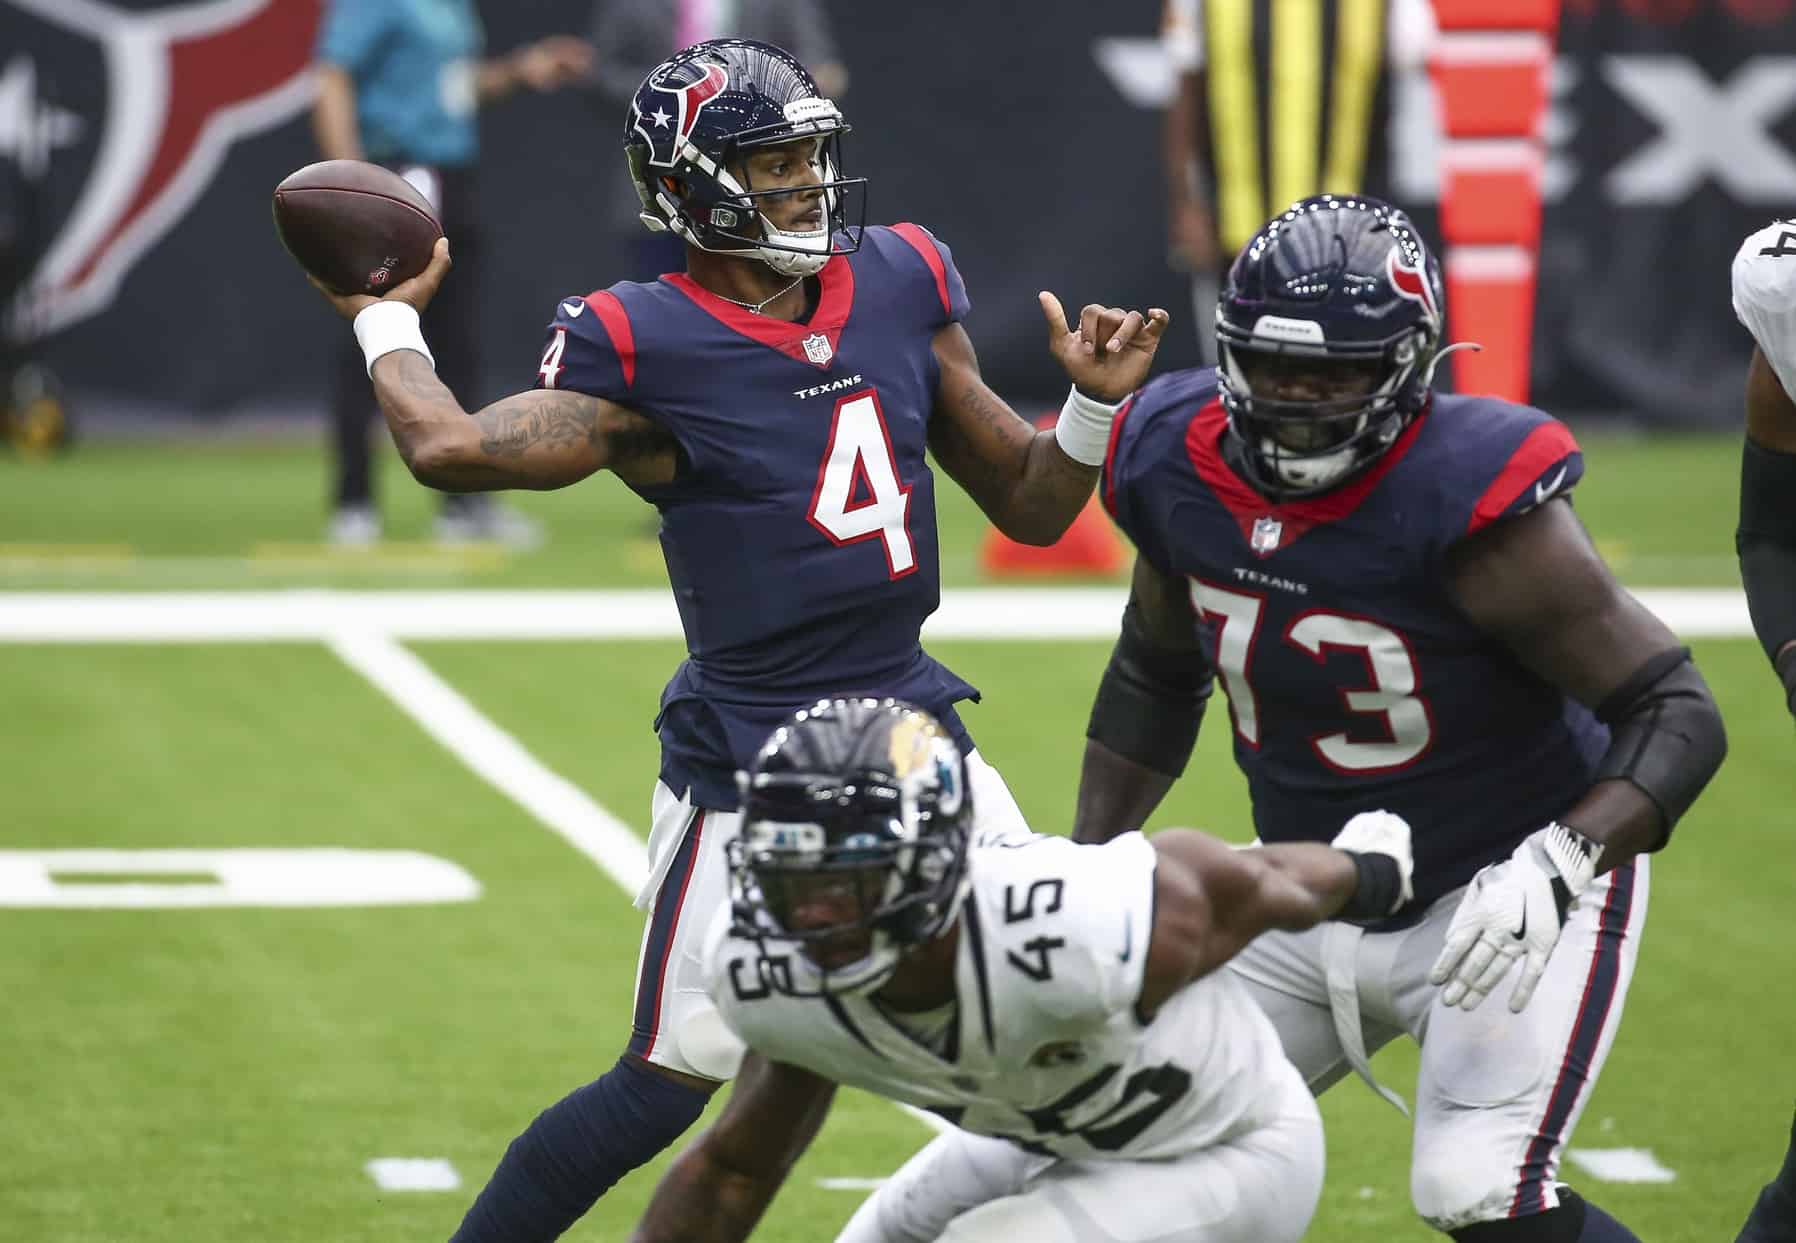 Cooper catching on: Browns WR forging relationship with Deshaun Watson